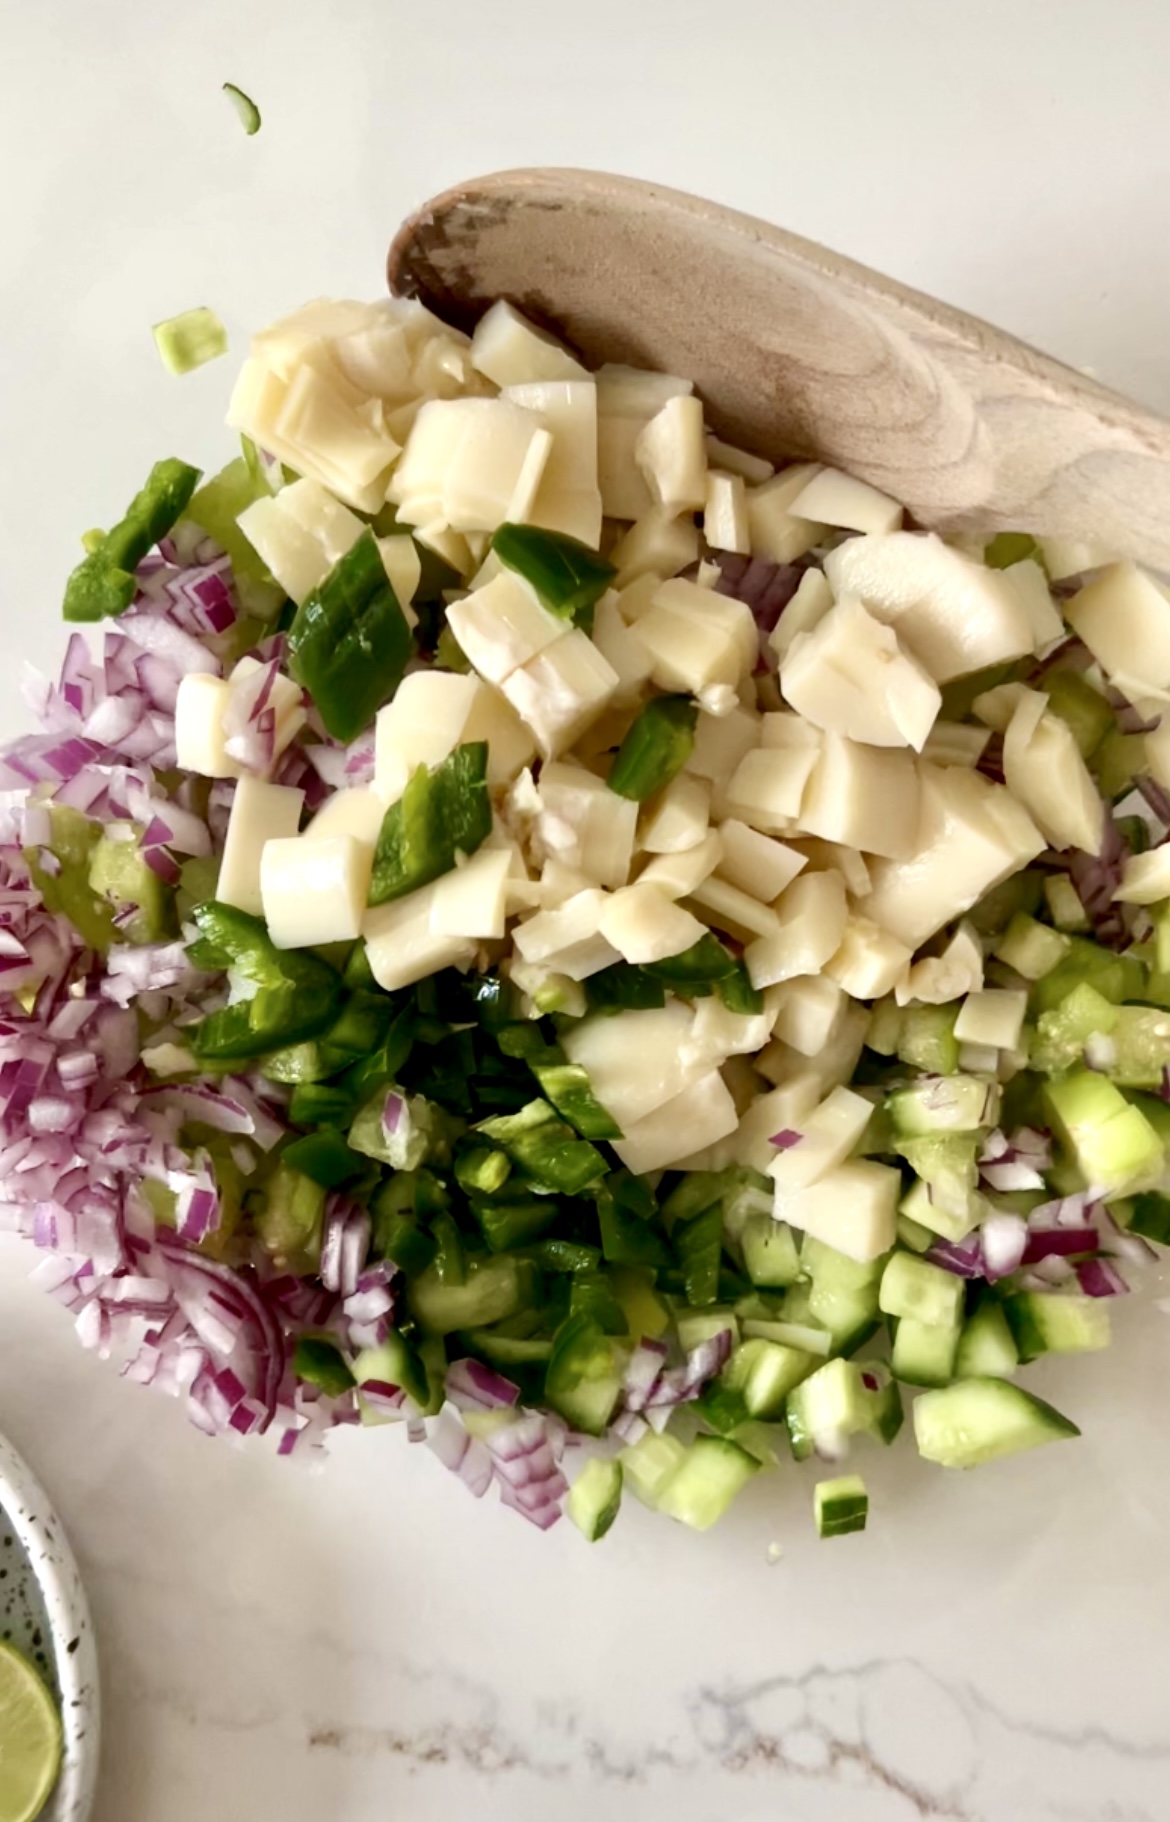 A bowl of onions and green peppers chopped with a wooden spoon, perfect for making Ceviche verde.